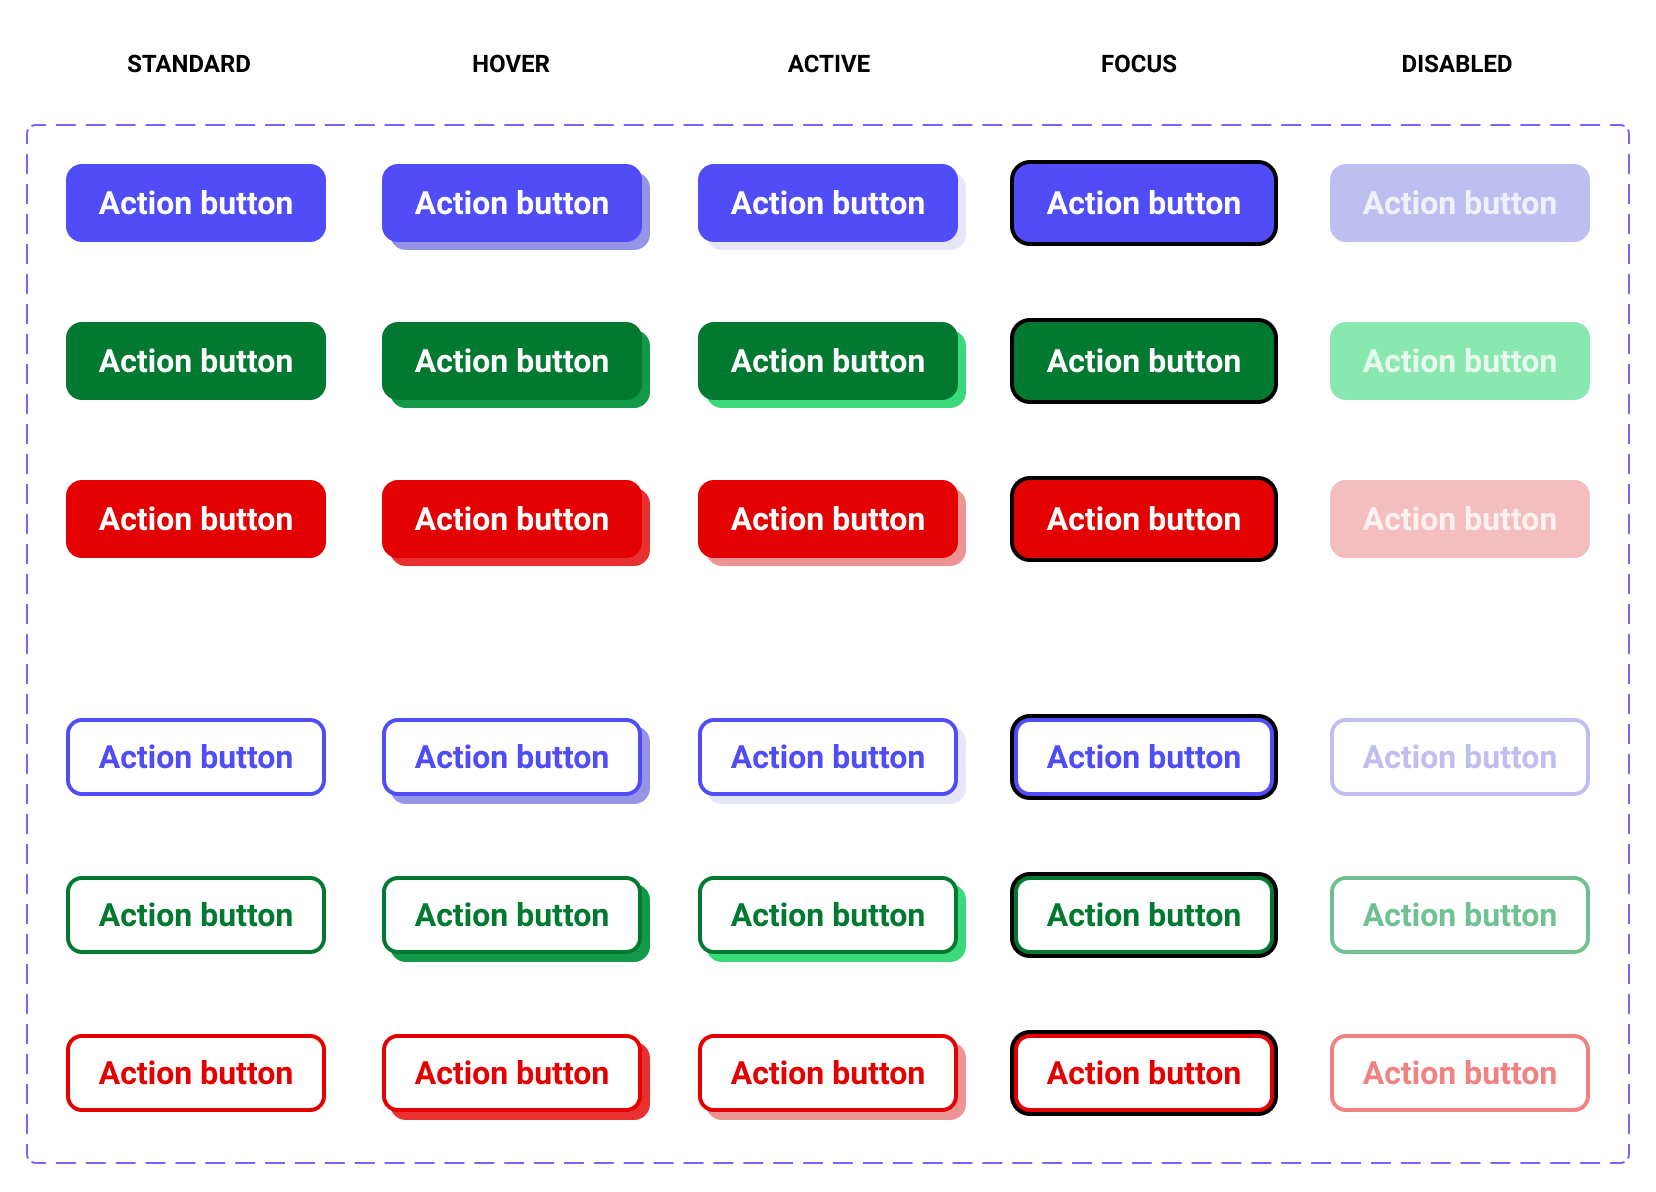 Our simple buttons from earlier but in their various states, in various semantic colors and with a secondary declination